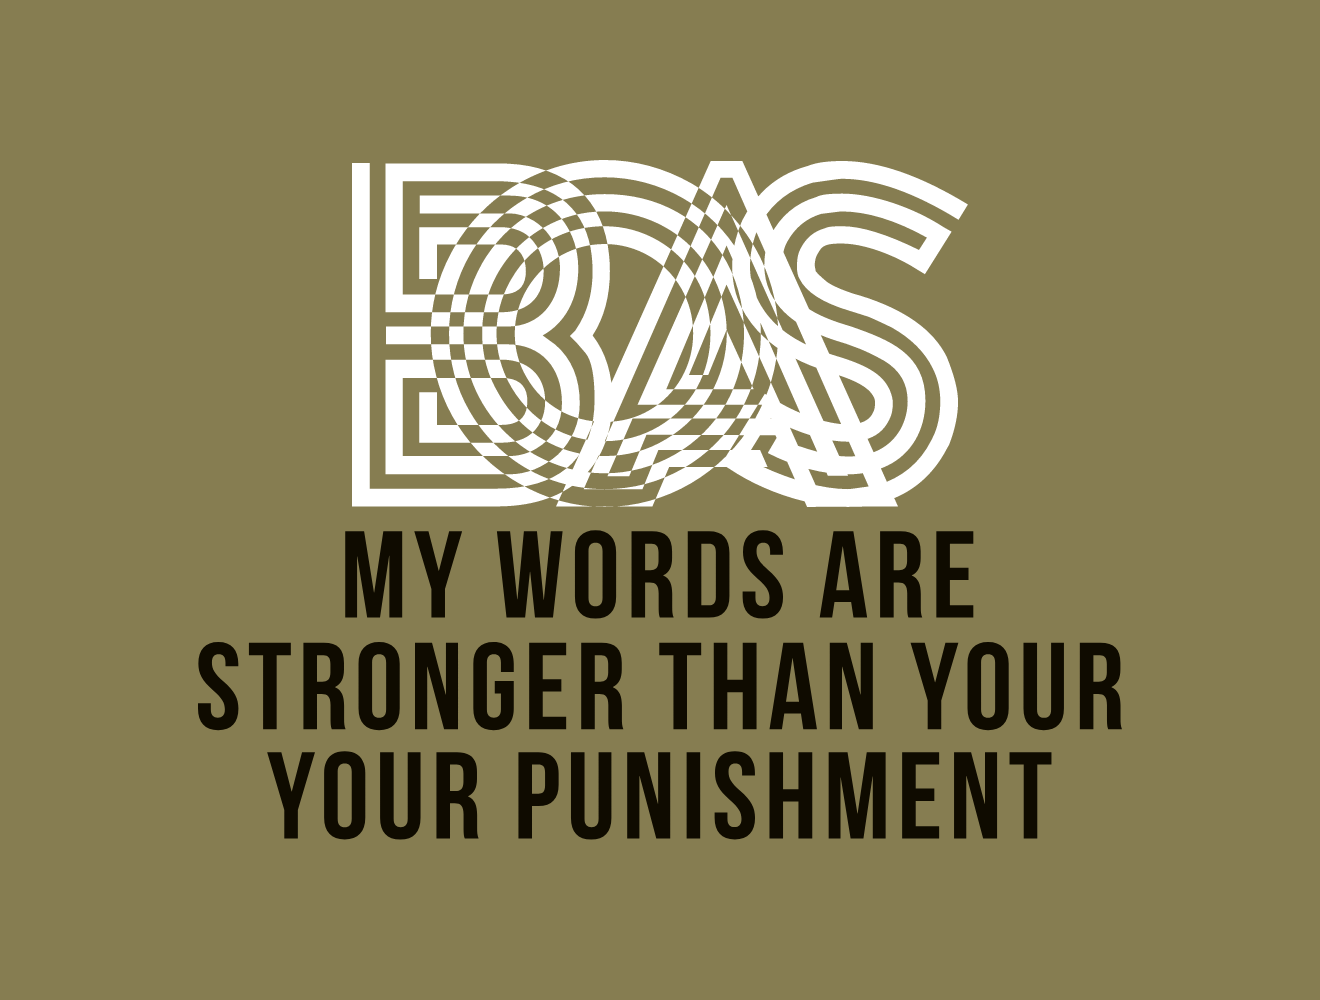 My Words Are Stronger Than Your Punishment